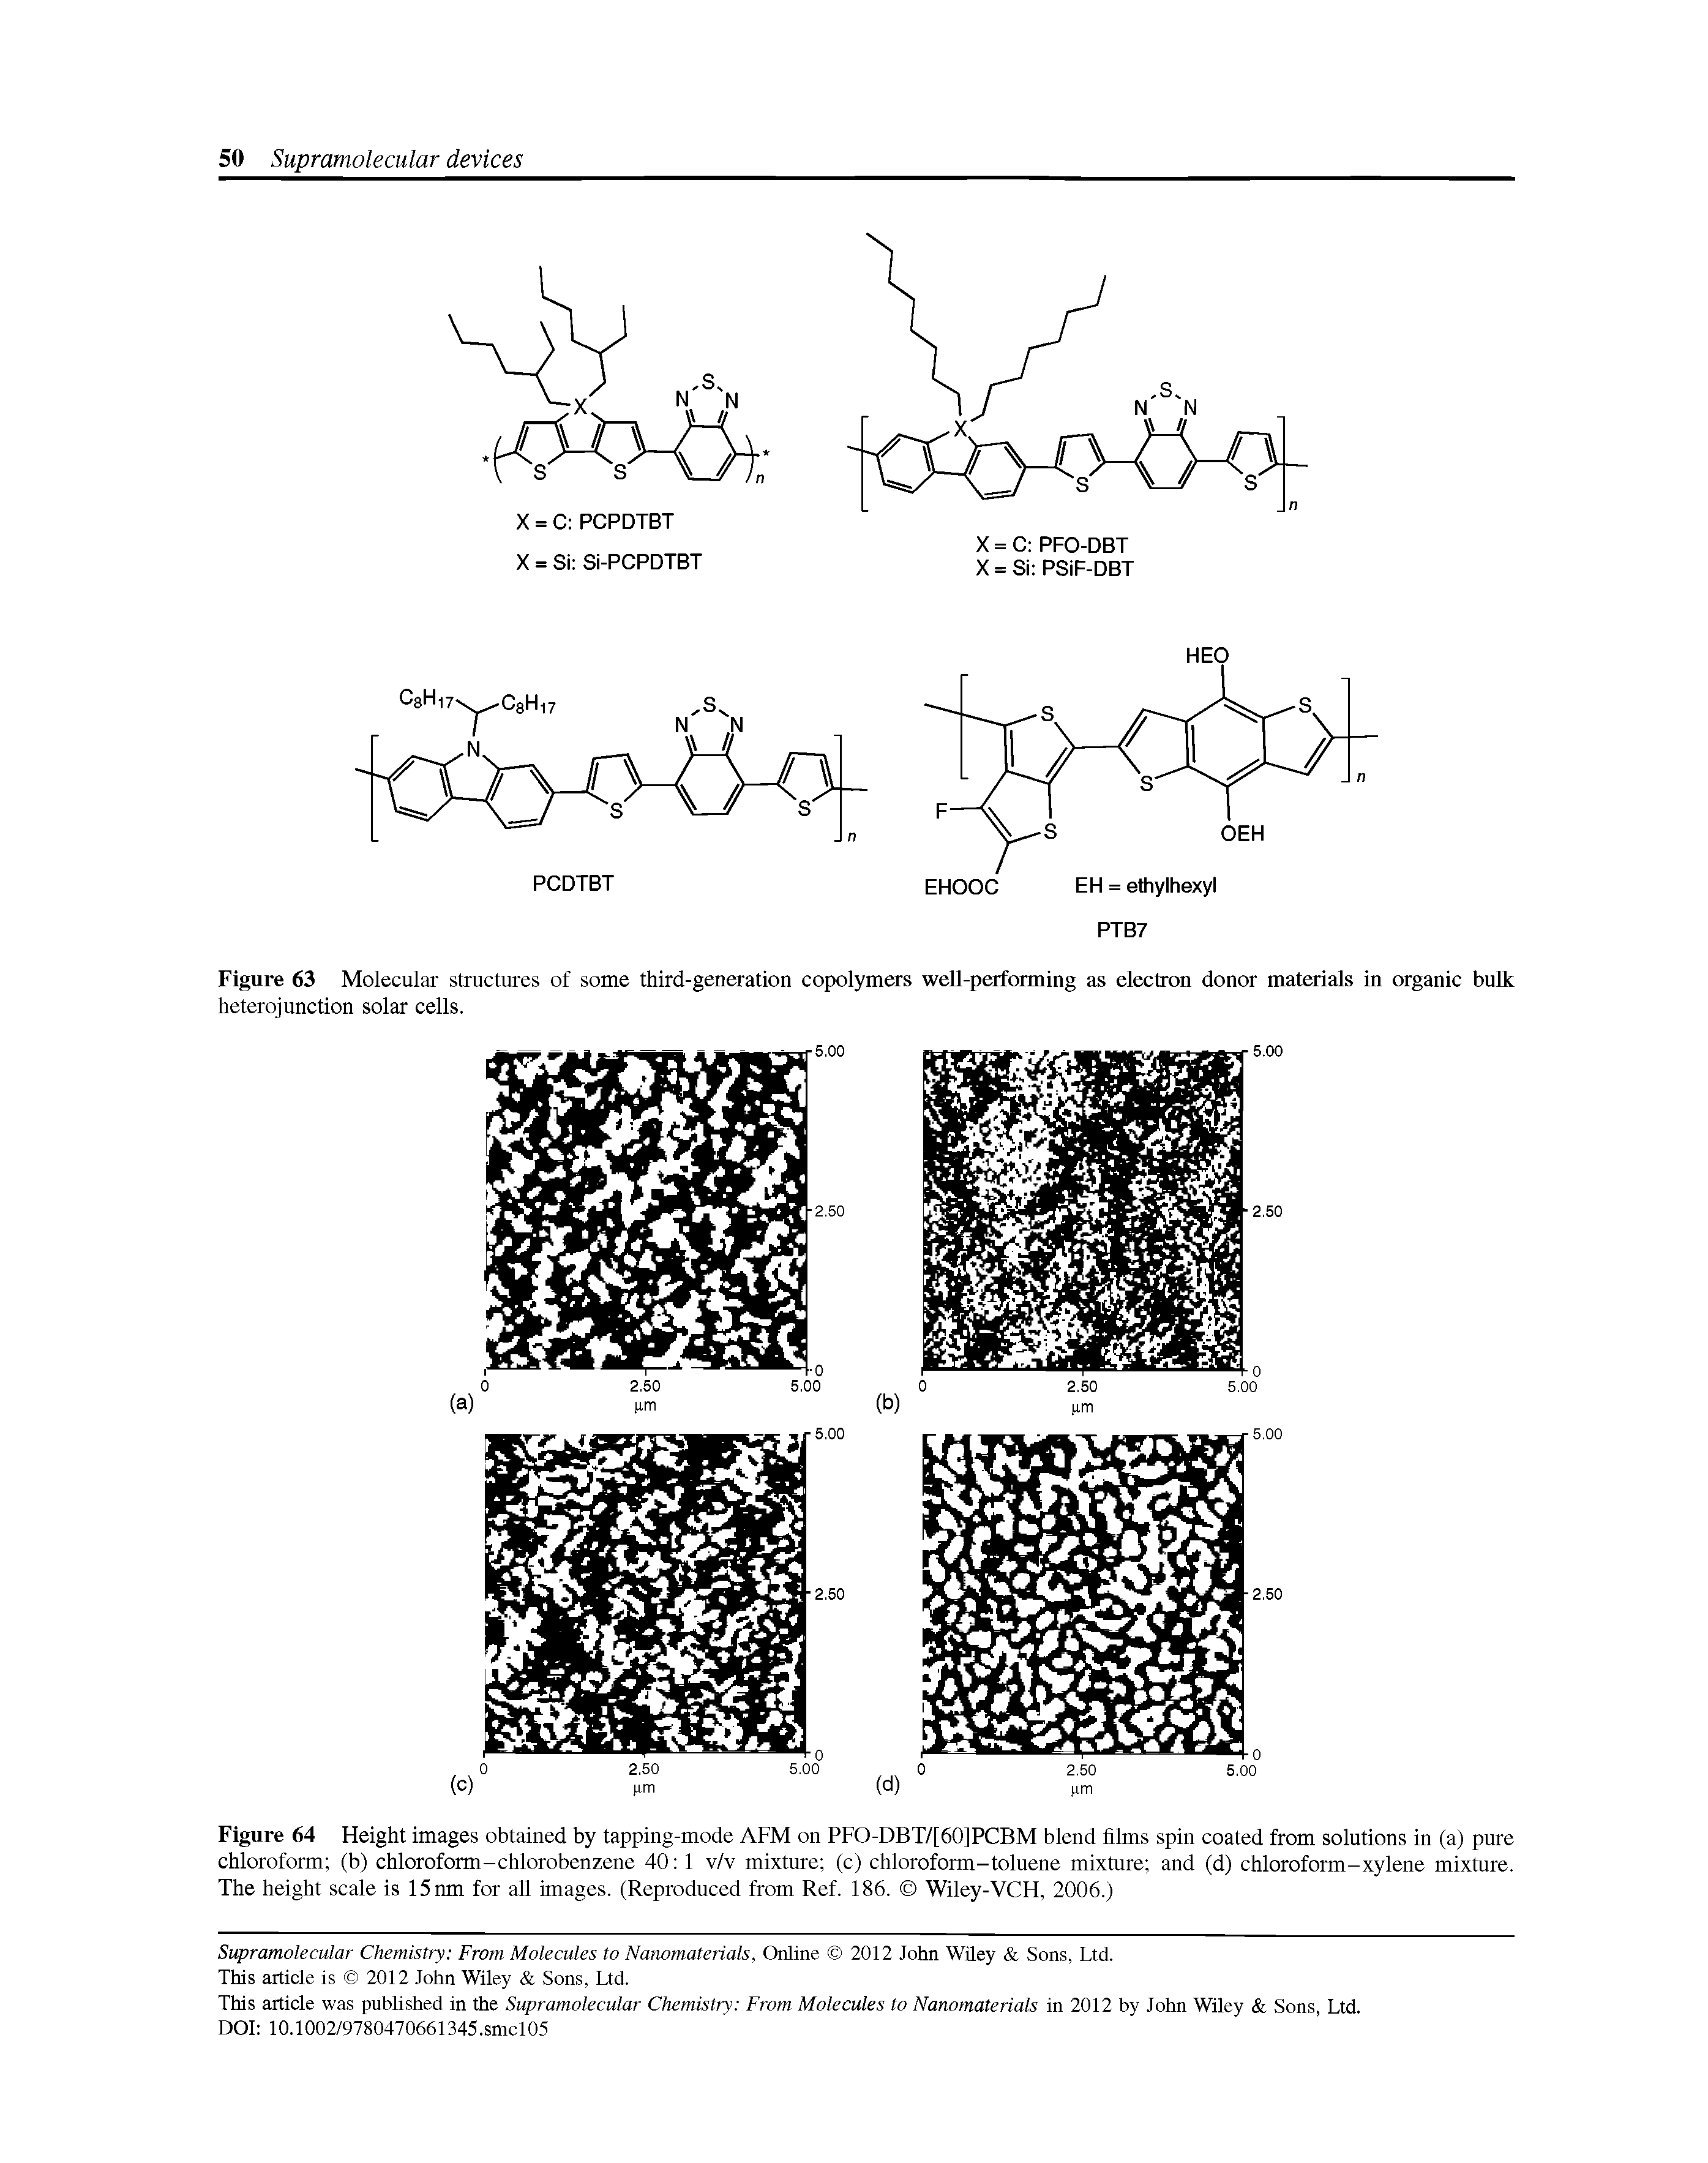 Figure 64 Height images obtained by tapping-mode AFM on PFO-DBT/[60]PCBM blend films spin coated from solutions in (a) pure chloroform (b) chloroform-chlorobenzene 40 1 v/v mixture (c) chloroform-toluene mixture and (d) chloroform-xylene mixture. The height scale is 15nm for all images. (Reproduced from Ref. 186. Wiley-VCH, 2006.)...